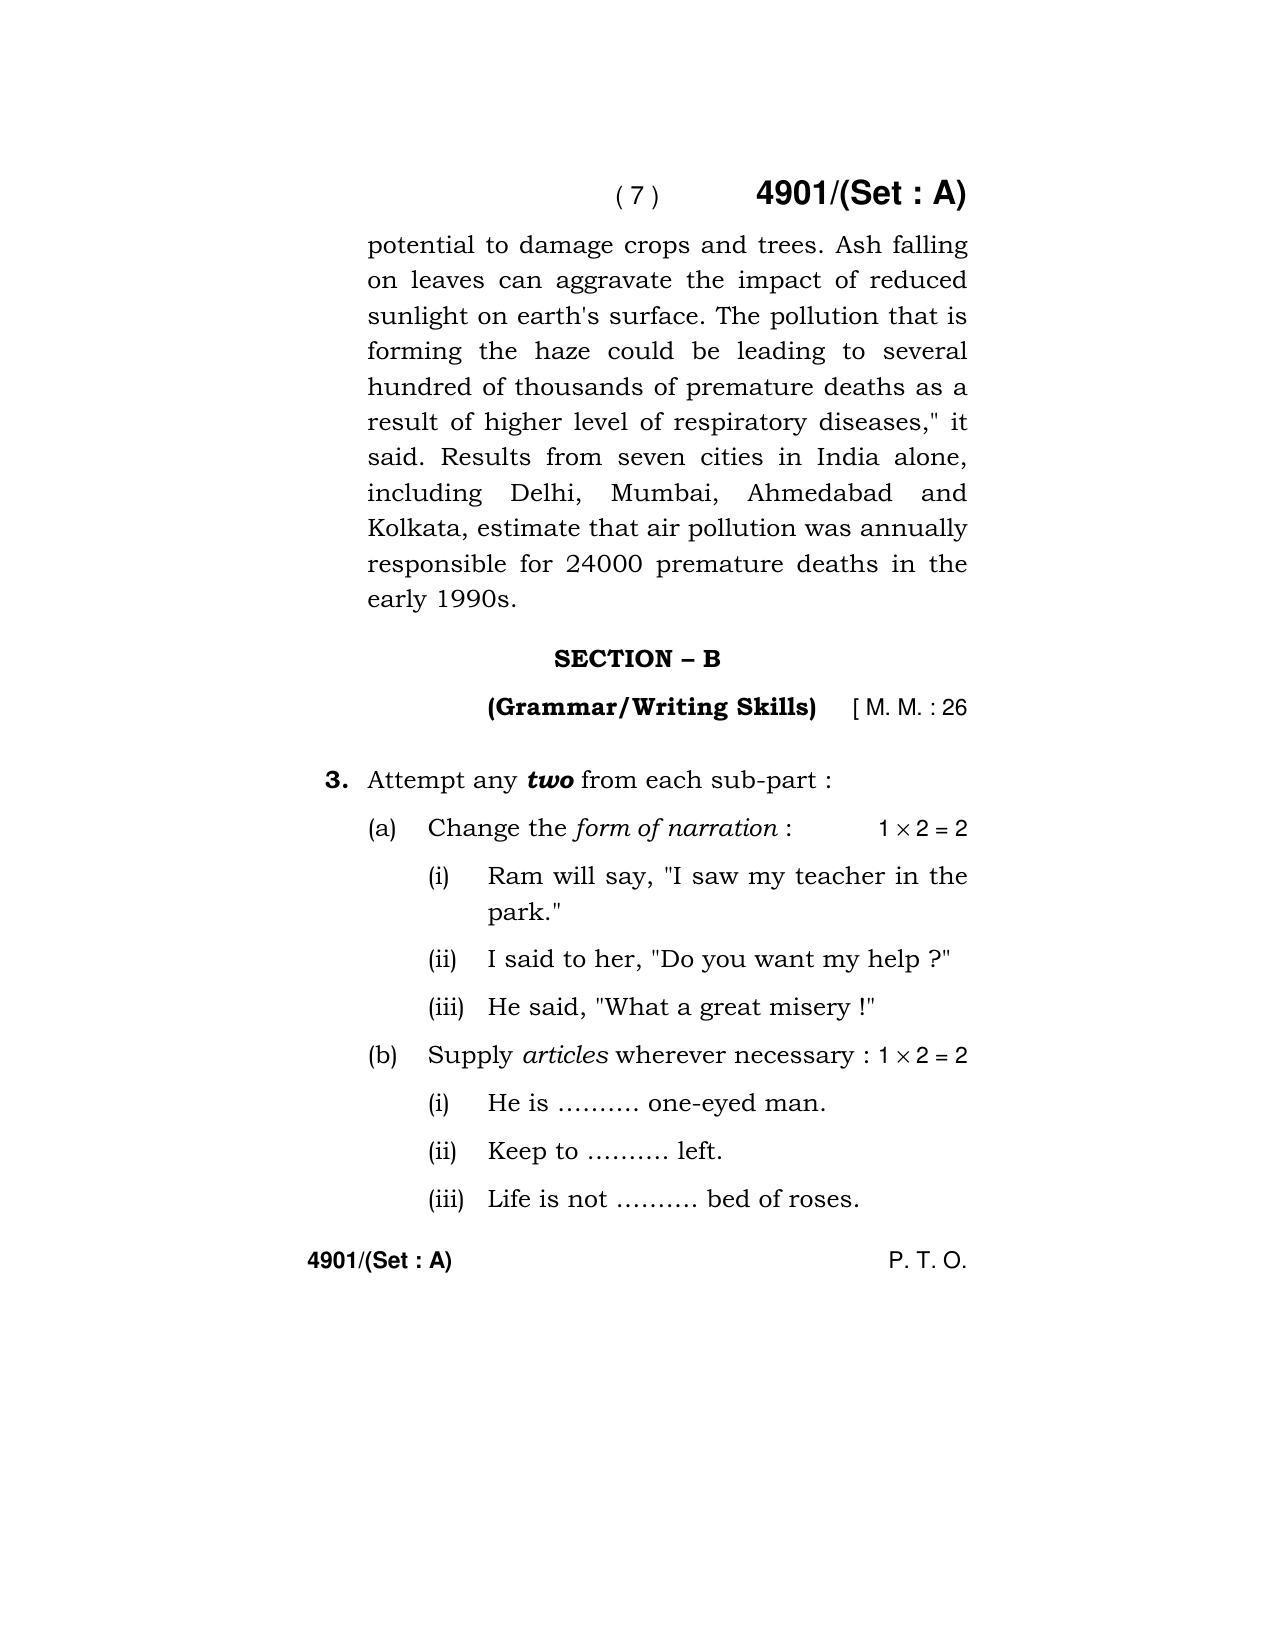 Haryana Board HBSE Class 12 English Core 2020 Question Paper - Page 7